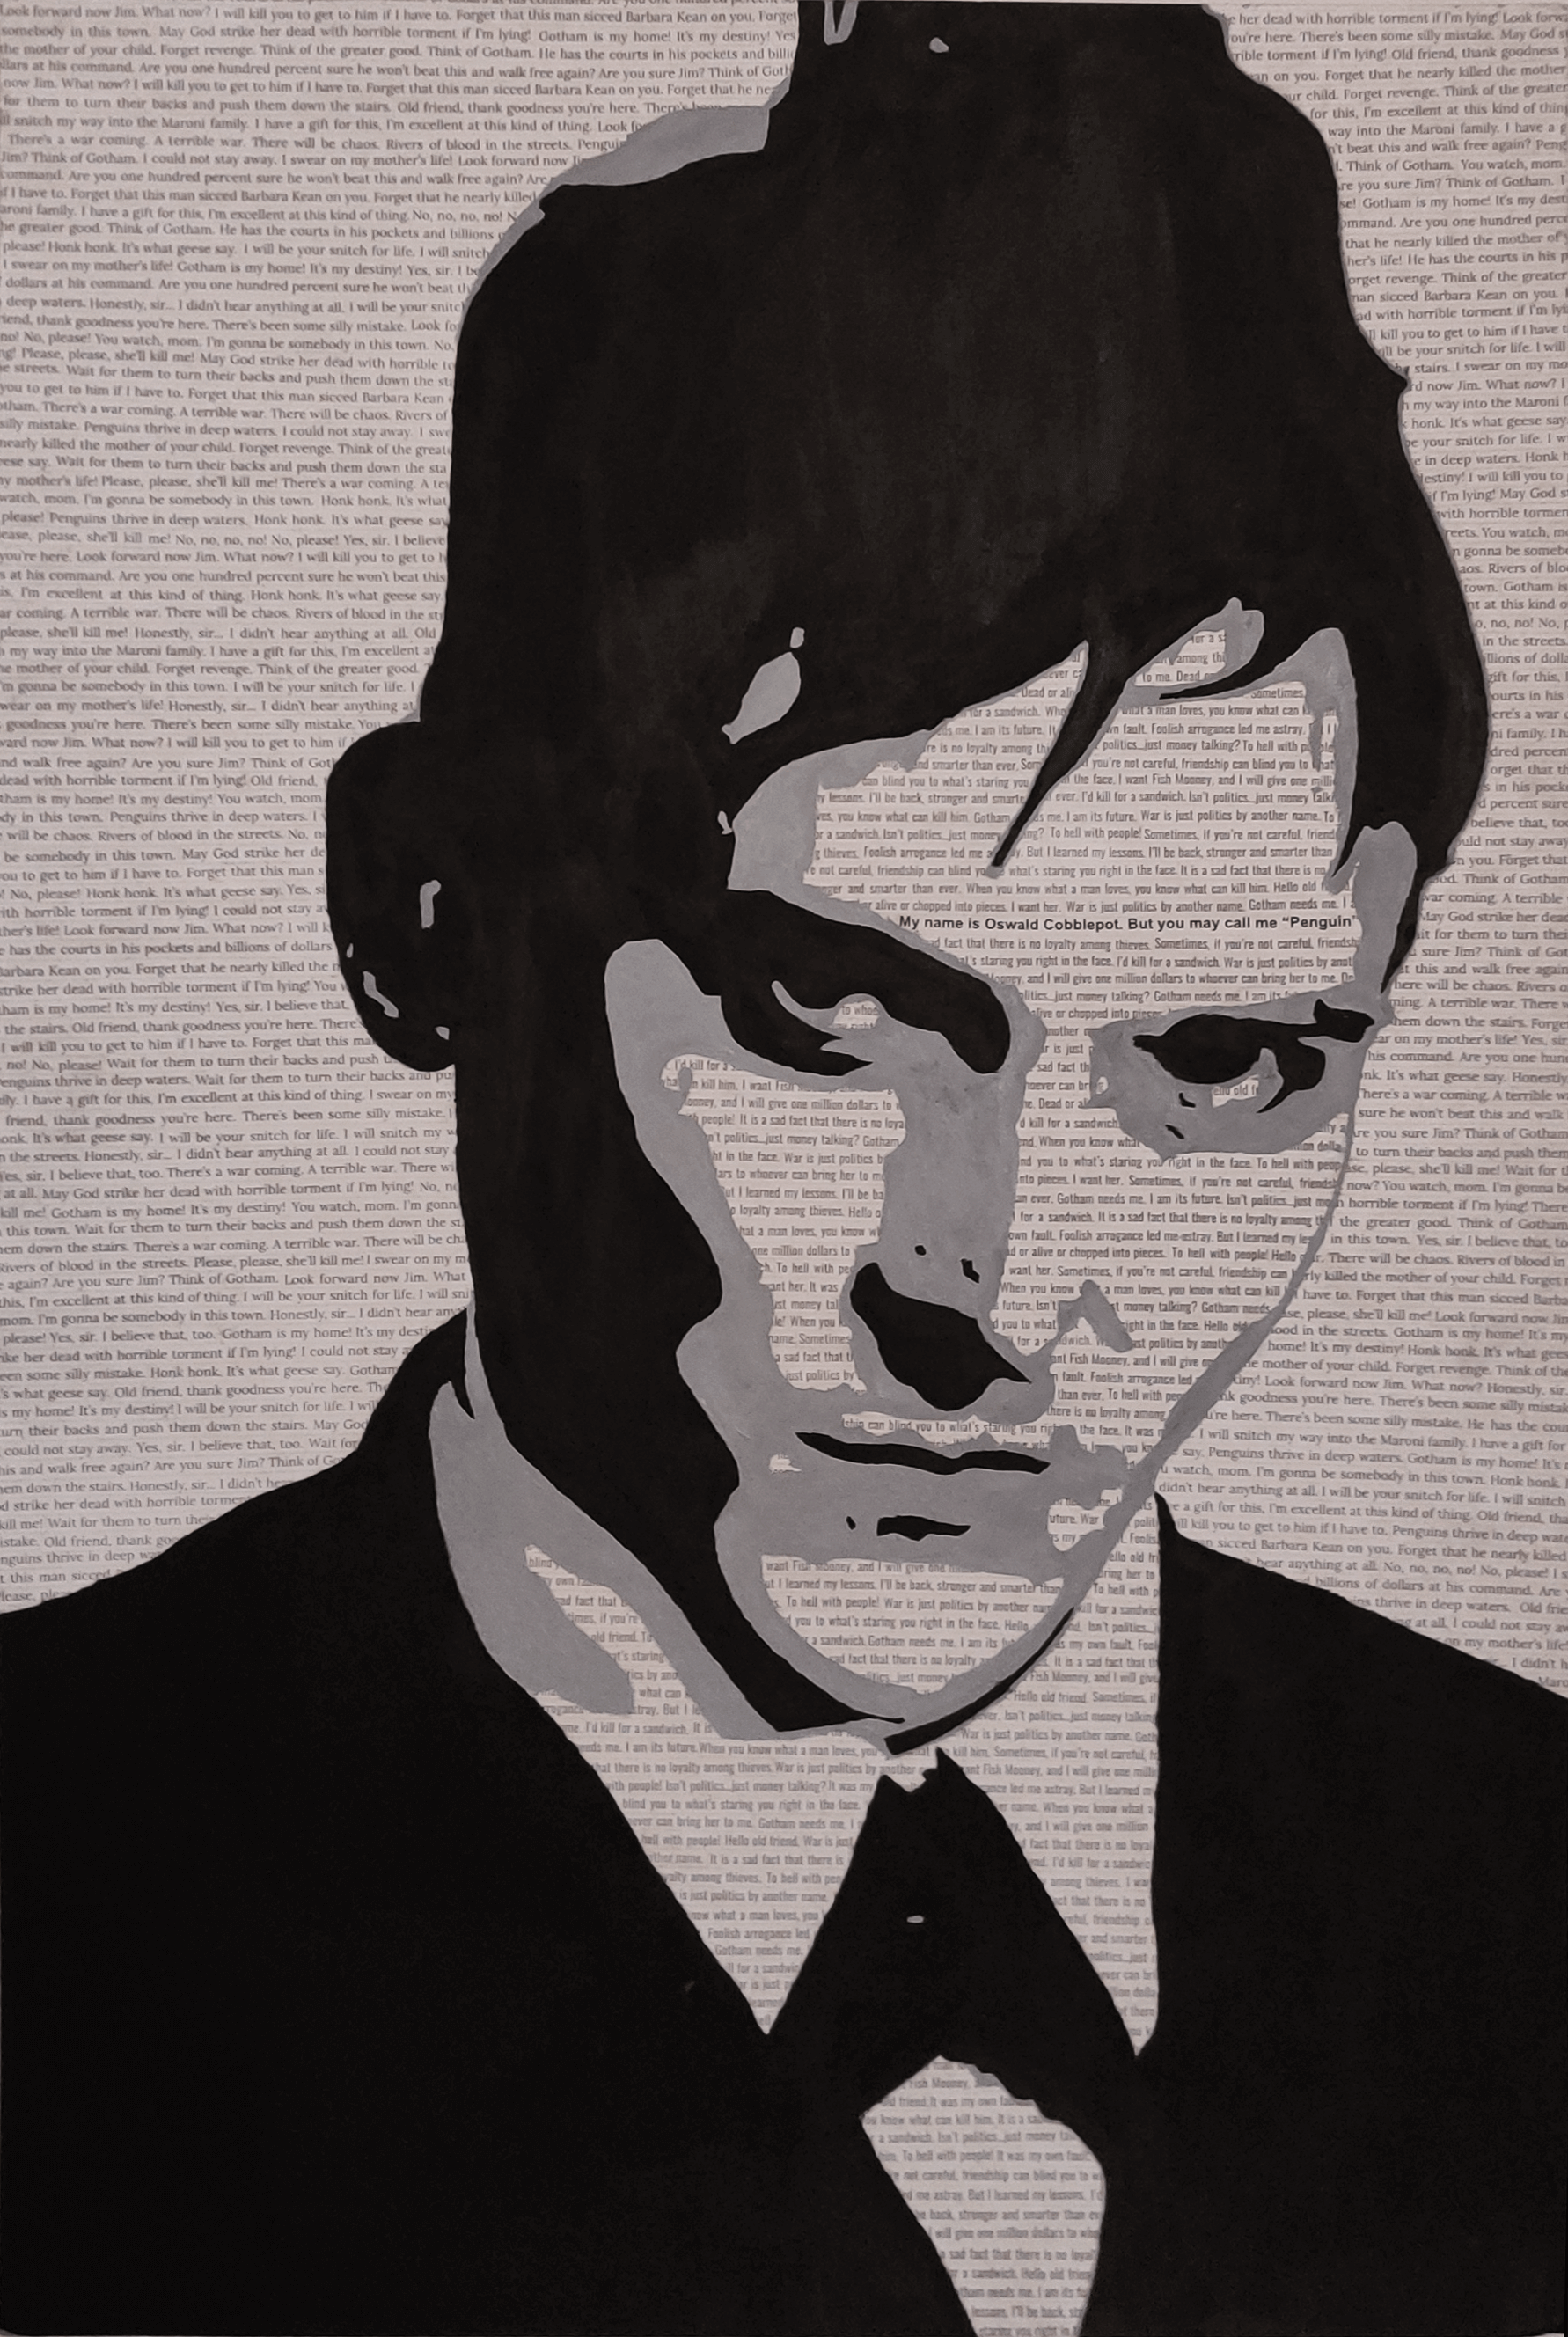 A stylized monochrome painting of Penguin from the TV show ‘Gotham’, with the white parts filled in with his quotes from the show.